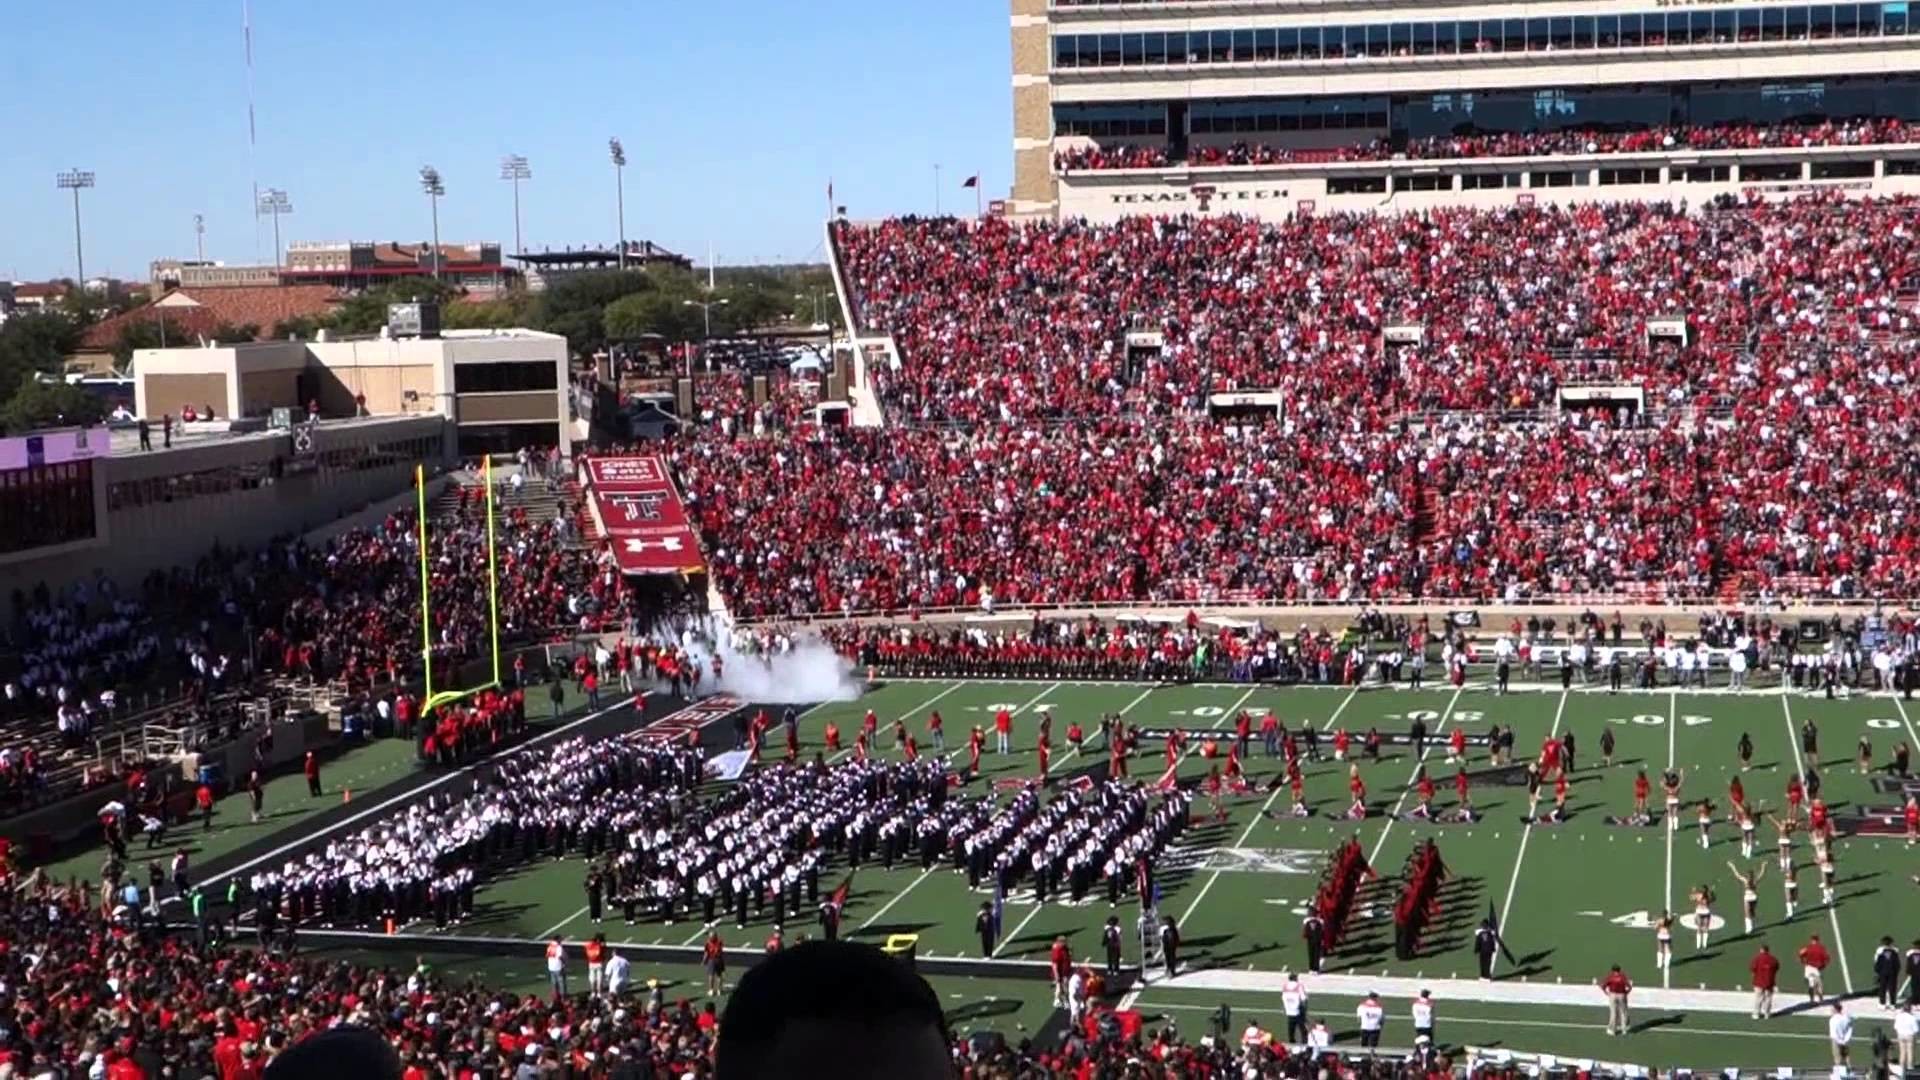 1920x1080 Texas Tech vs. Iowa State - Entrance of Red Raiders and run of the Masked  Rider - YouTube